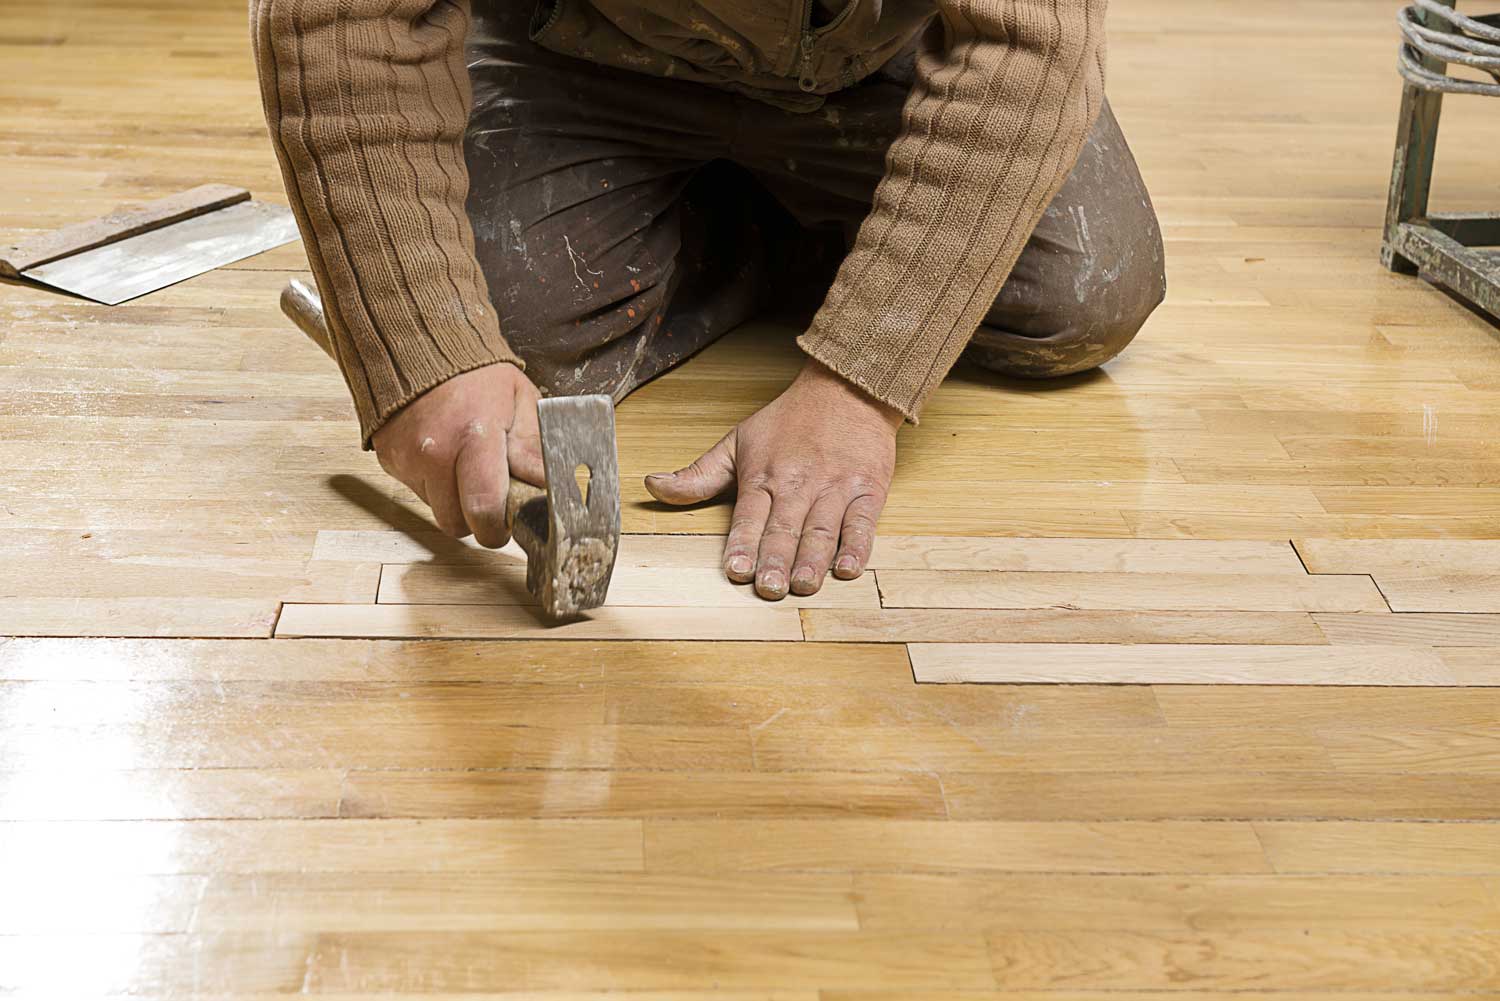 Antique flooring refinishing near you in O’fallon / St. Charles County - Footprints Floors.